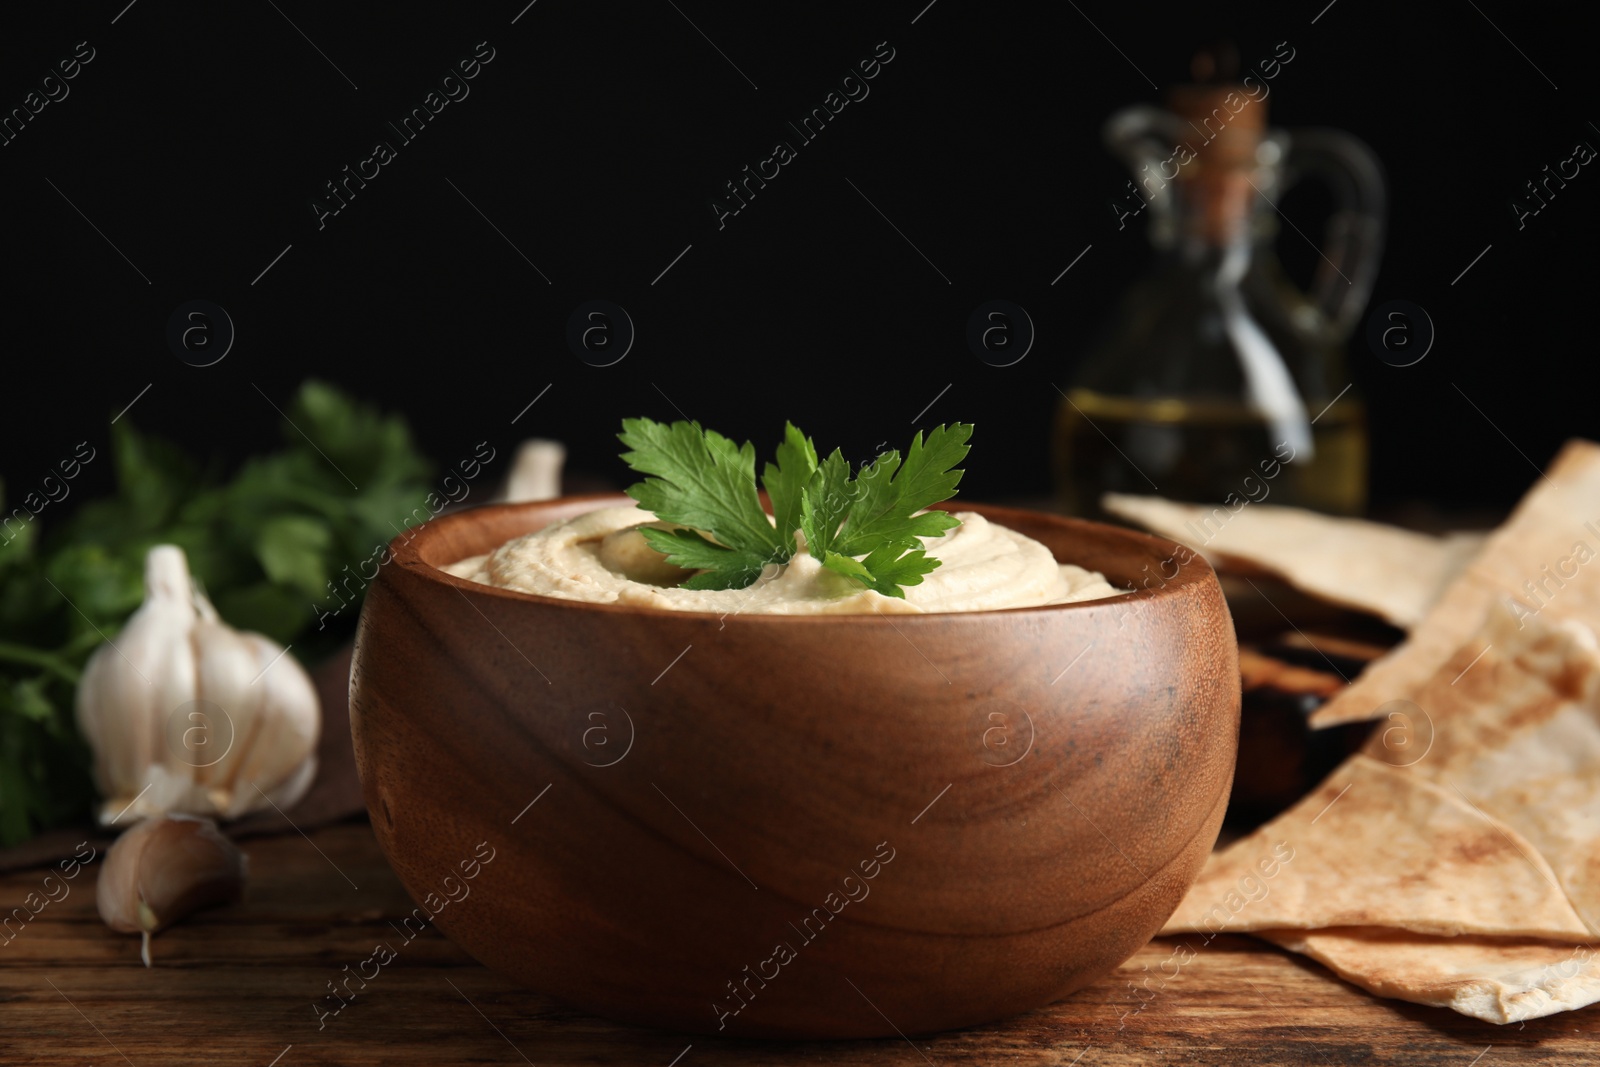 Photo of Delicious hummus and pita chips on wooden table, closeup